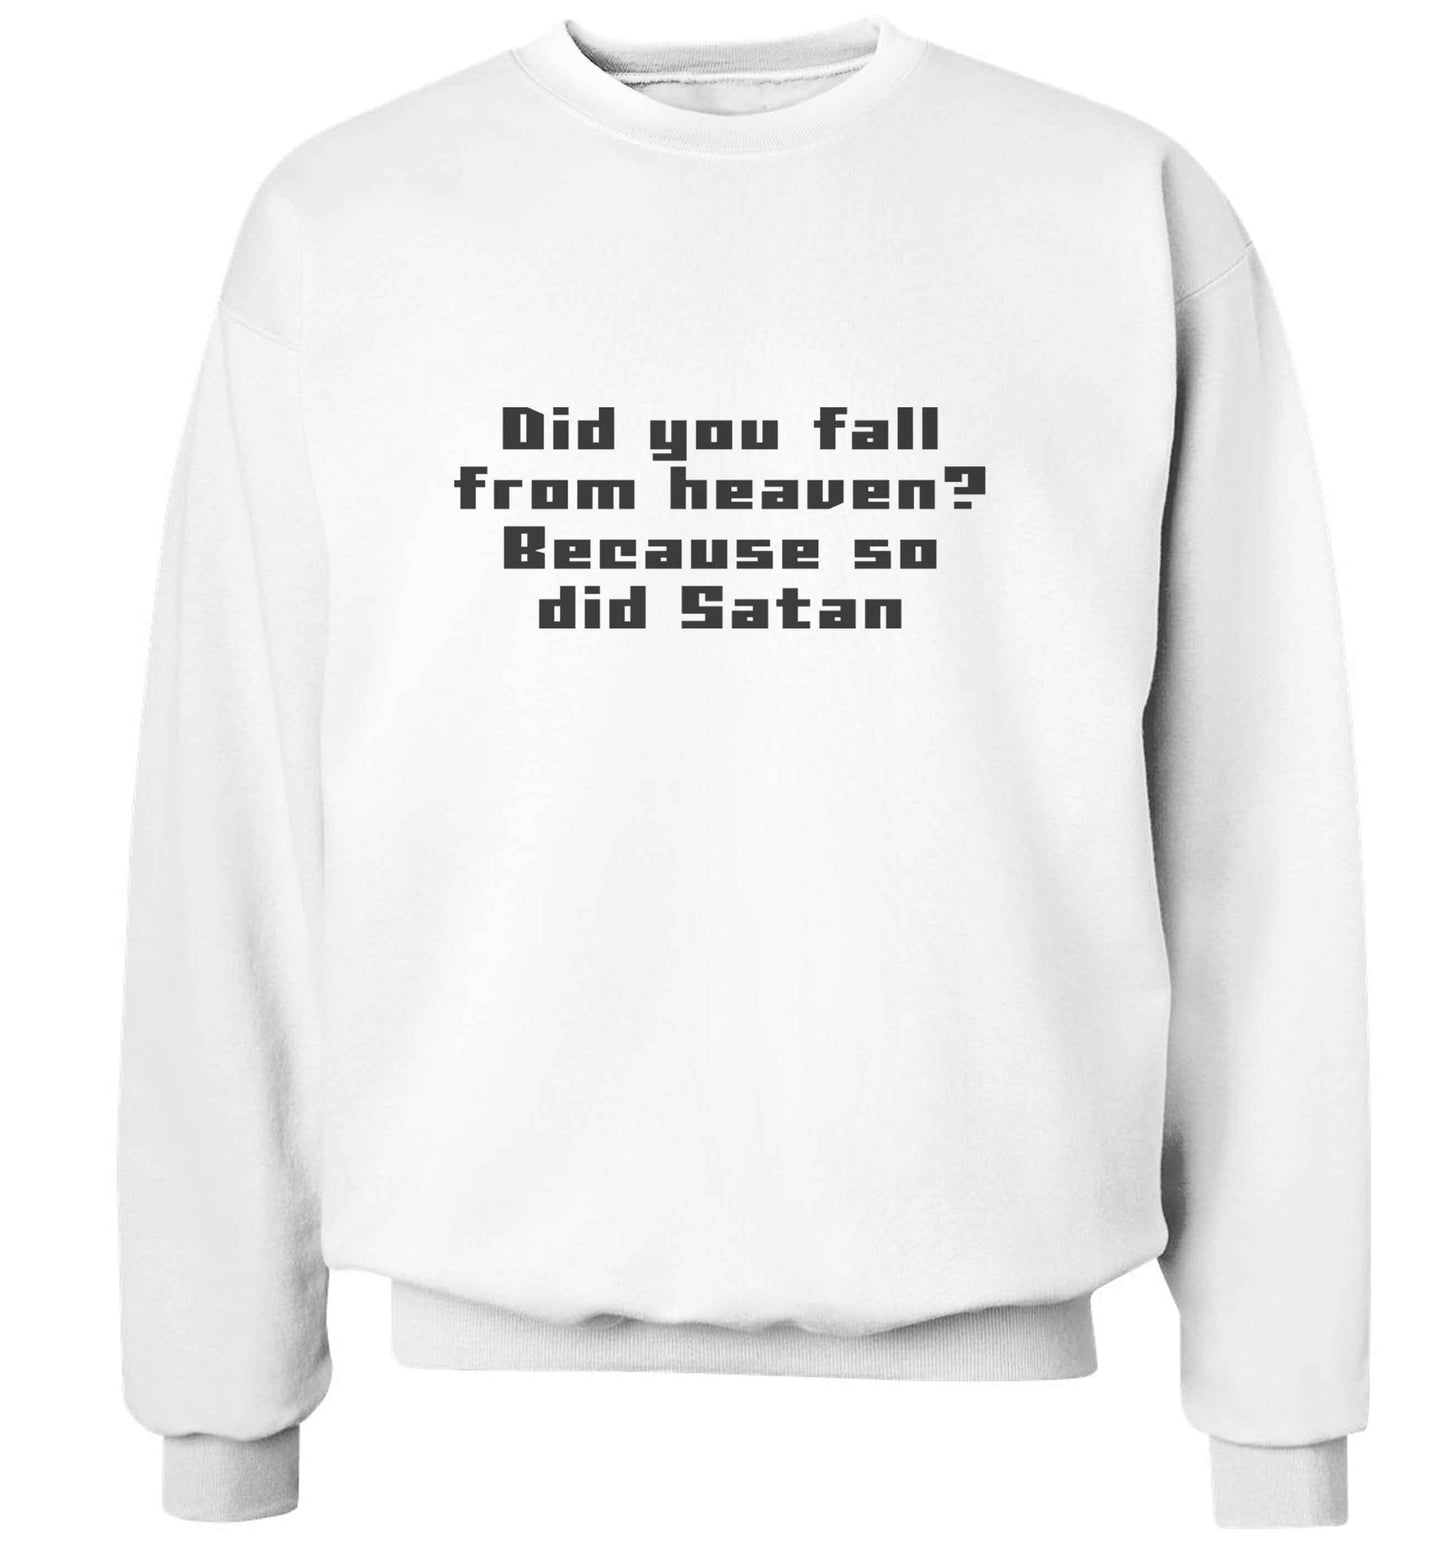 Did you fall from Heaven because so did Satan adult's unisex white sweater 2XL